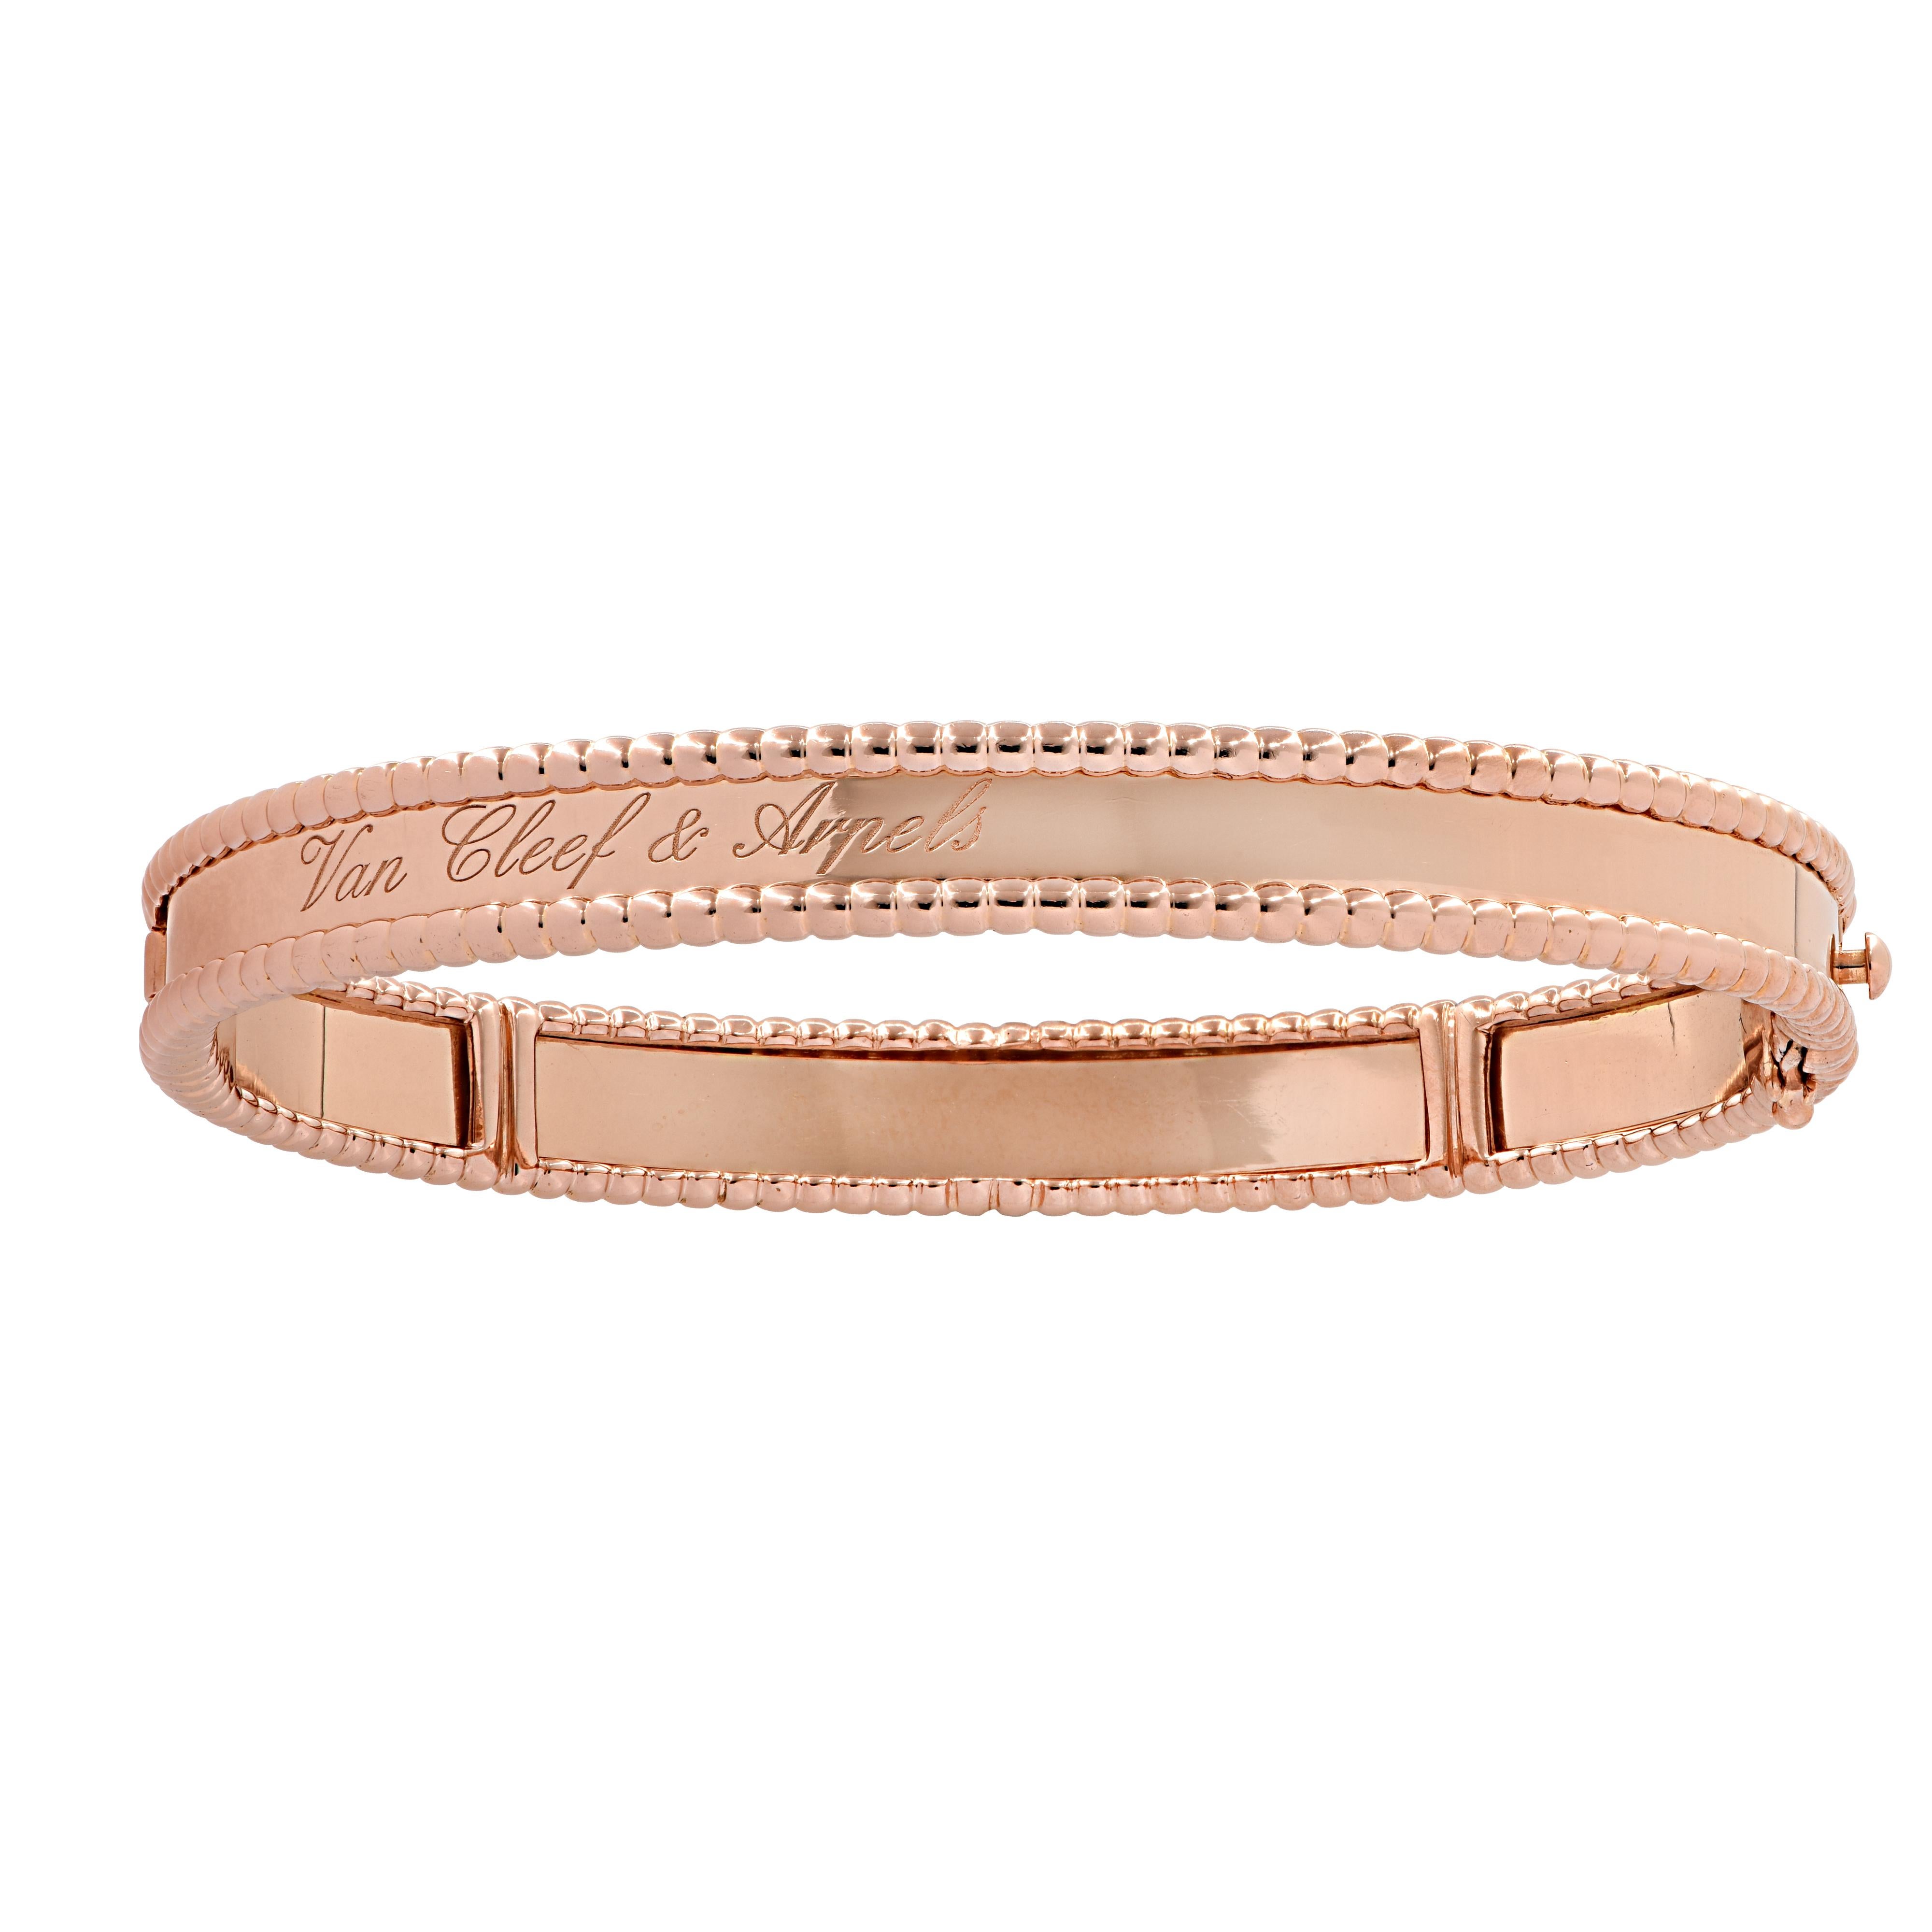 From the legendary House of Van Cleef & Arpels, this timelessly elegant Perlee Signature Bracelet, hand crafted in 18 karat rose gold, features the iconic Van Cleef & Arpels signature on a highly polished band embellished with small rose gold pearls